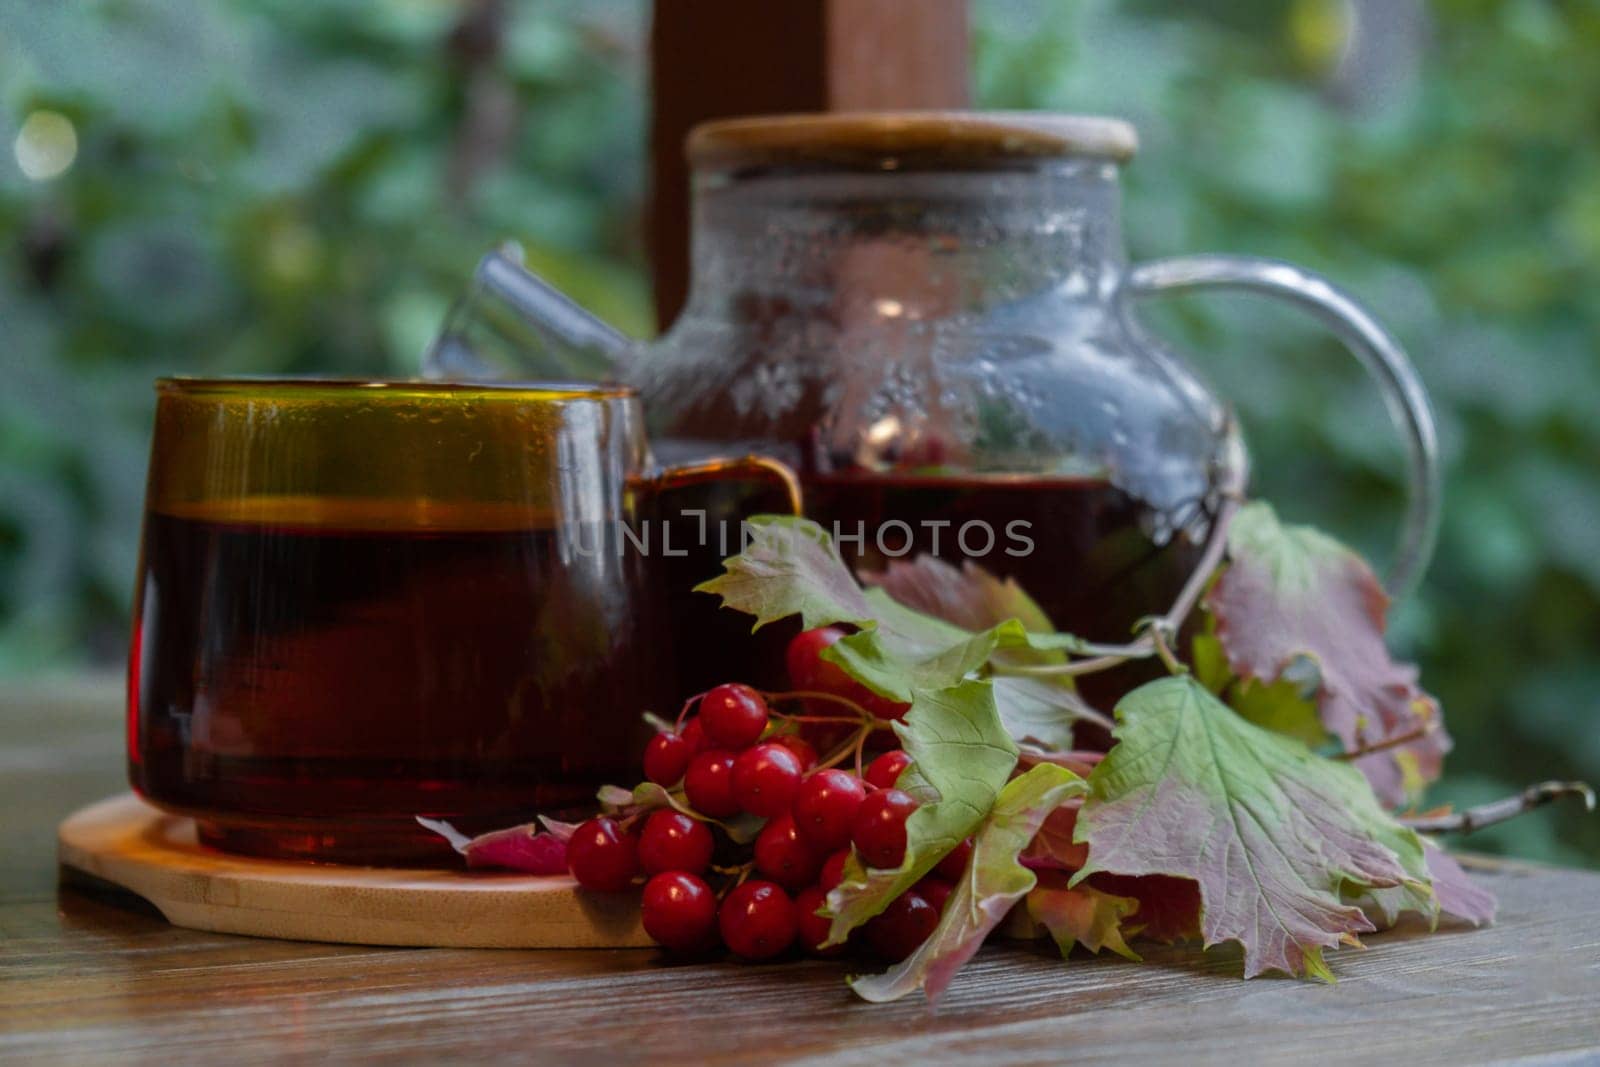 Guelder rose Viburnum red berries tea still life on table in green garden background. Healthy hot drink benefits. Natural organic aromatic drink in cup. Home-grown immunity-boosting herbs for tea. Autumn winter warming drink by anna_stasiia